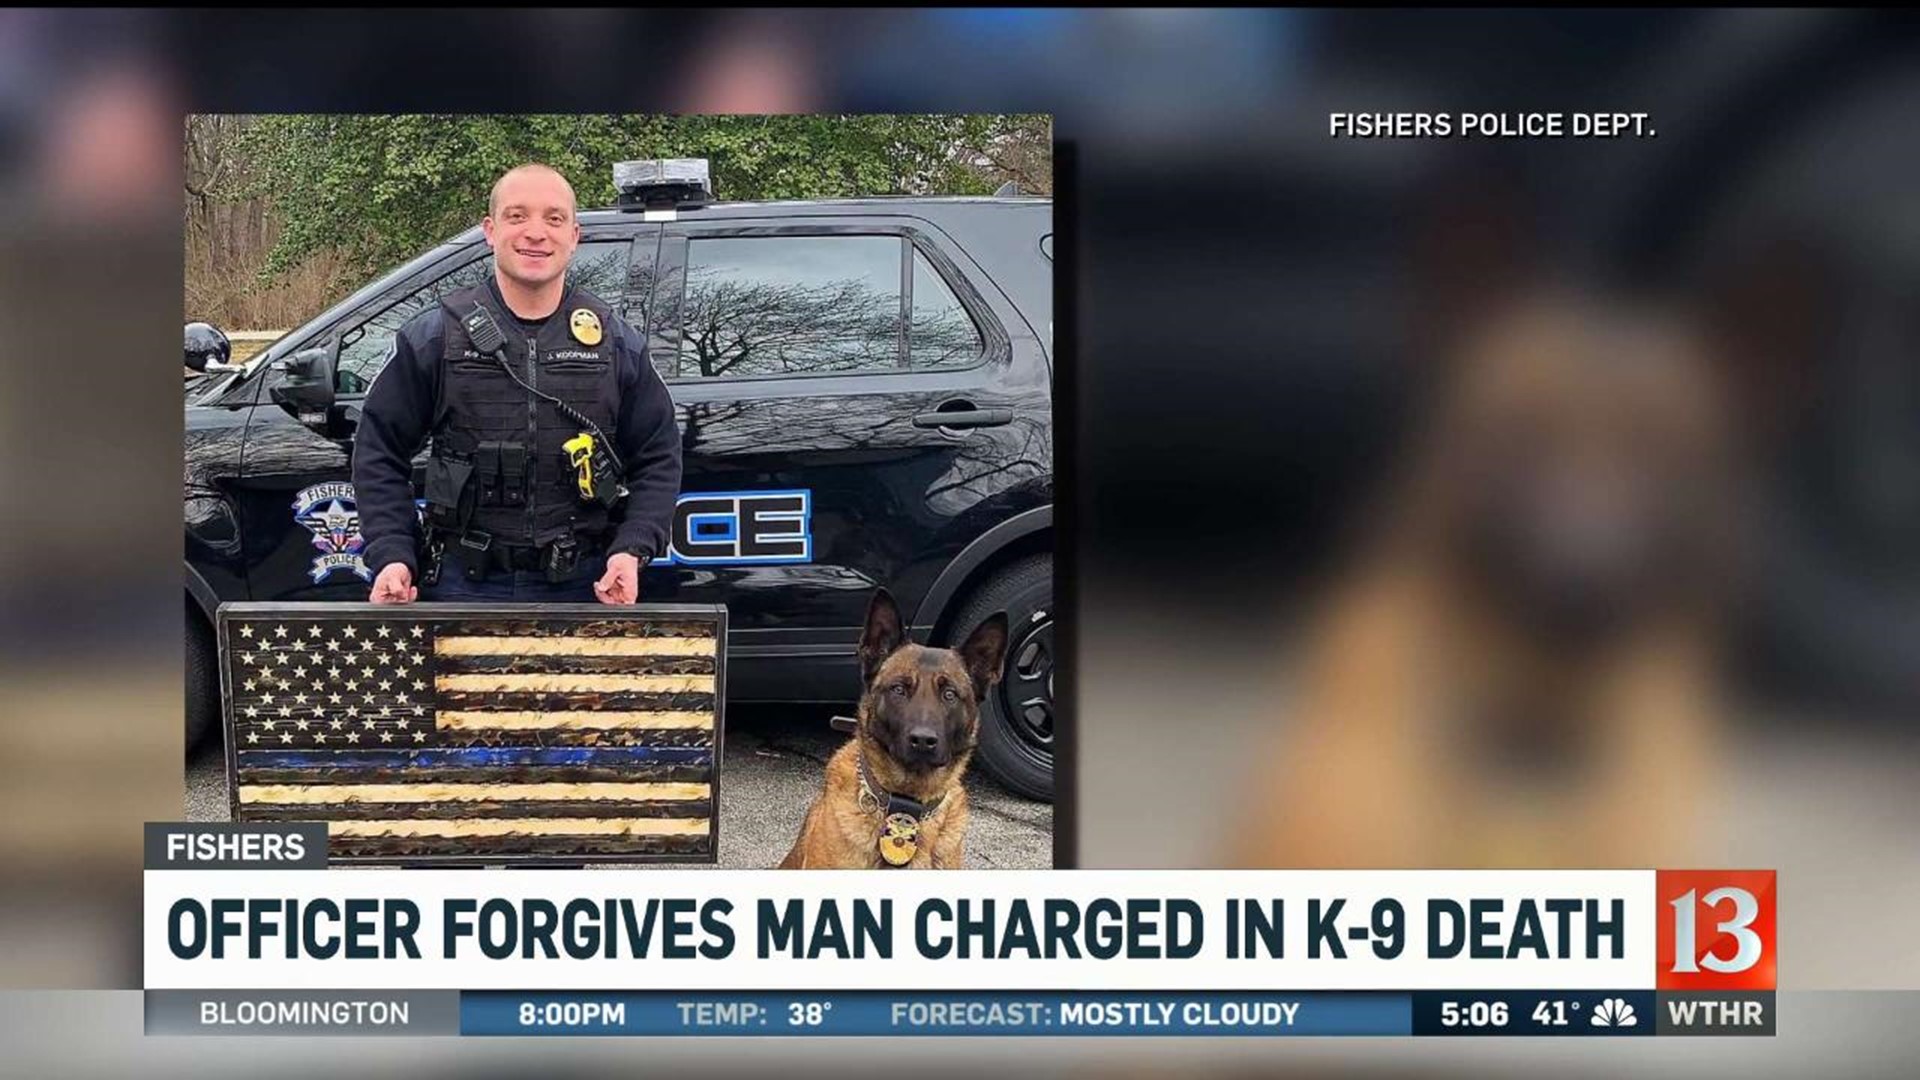 Officer forgives man charged in K9 death